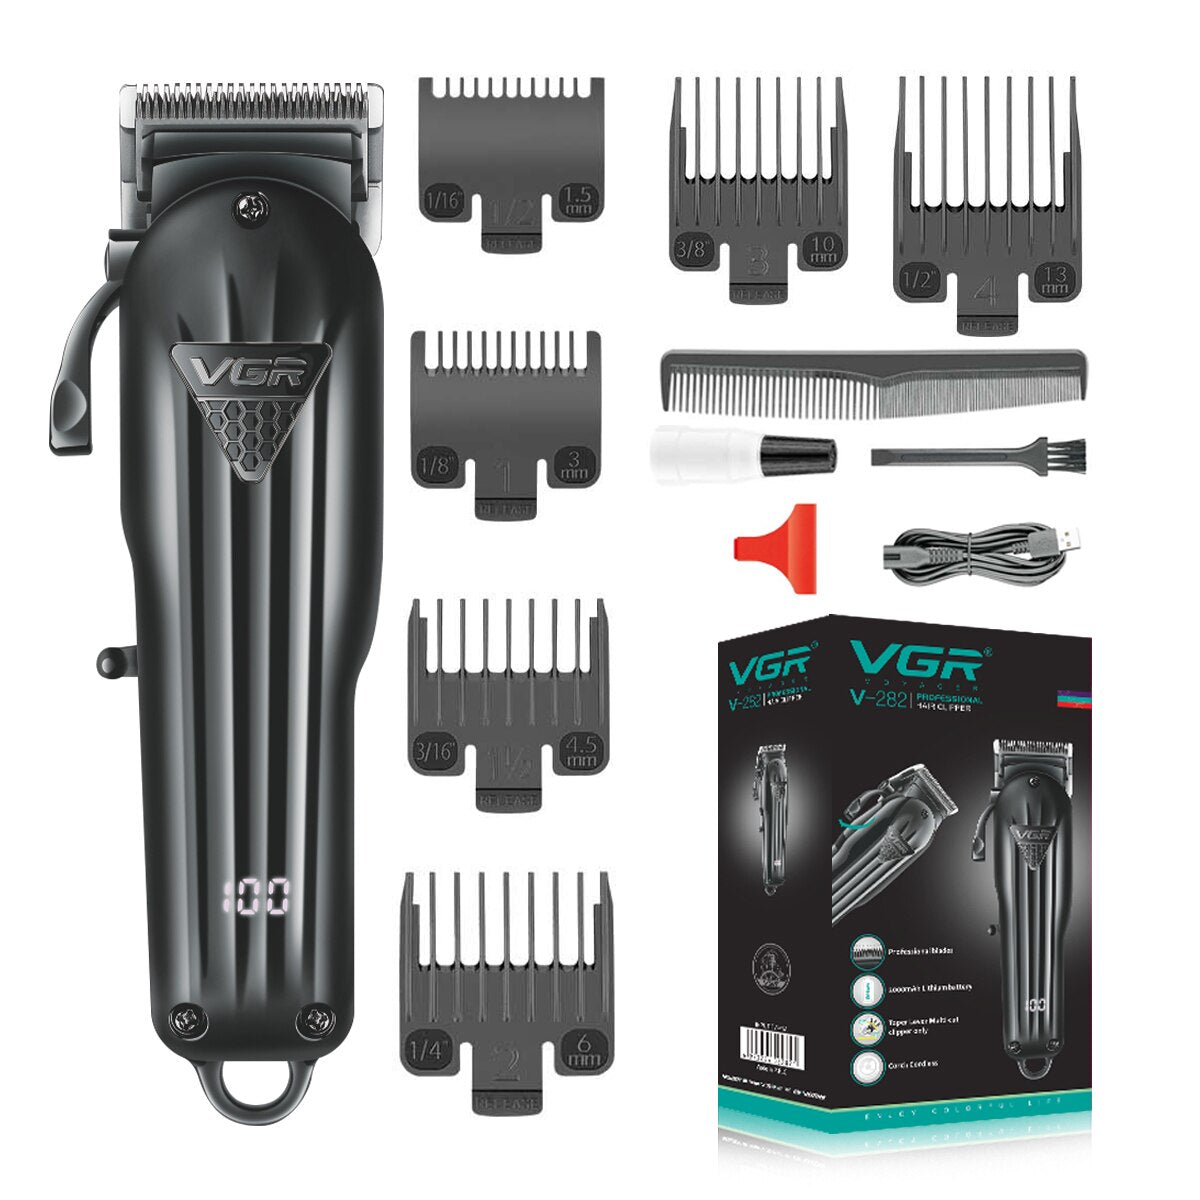 VGR Hair Clipper Professional Hair Cutting Machine Hair Trimmer Adjustable Cordless Rechargeable V 282